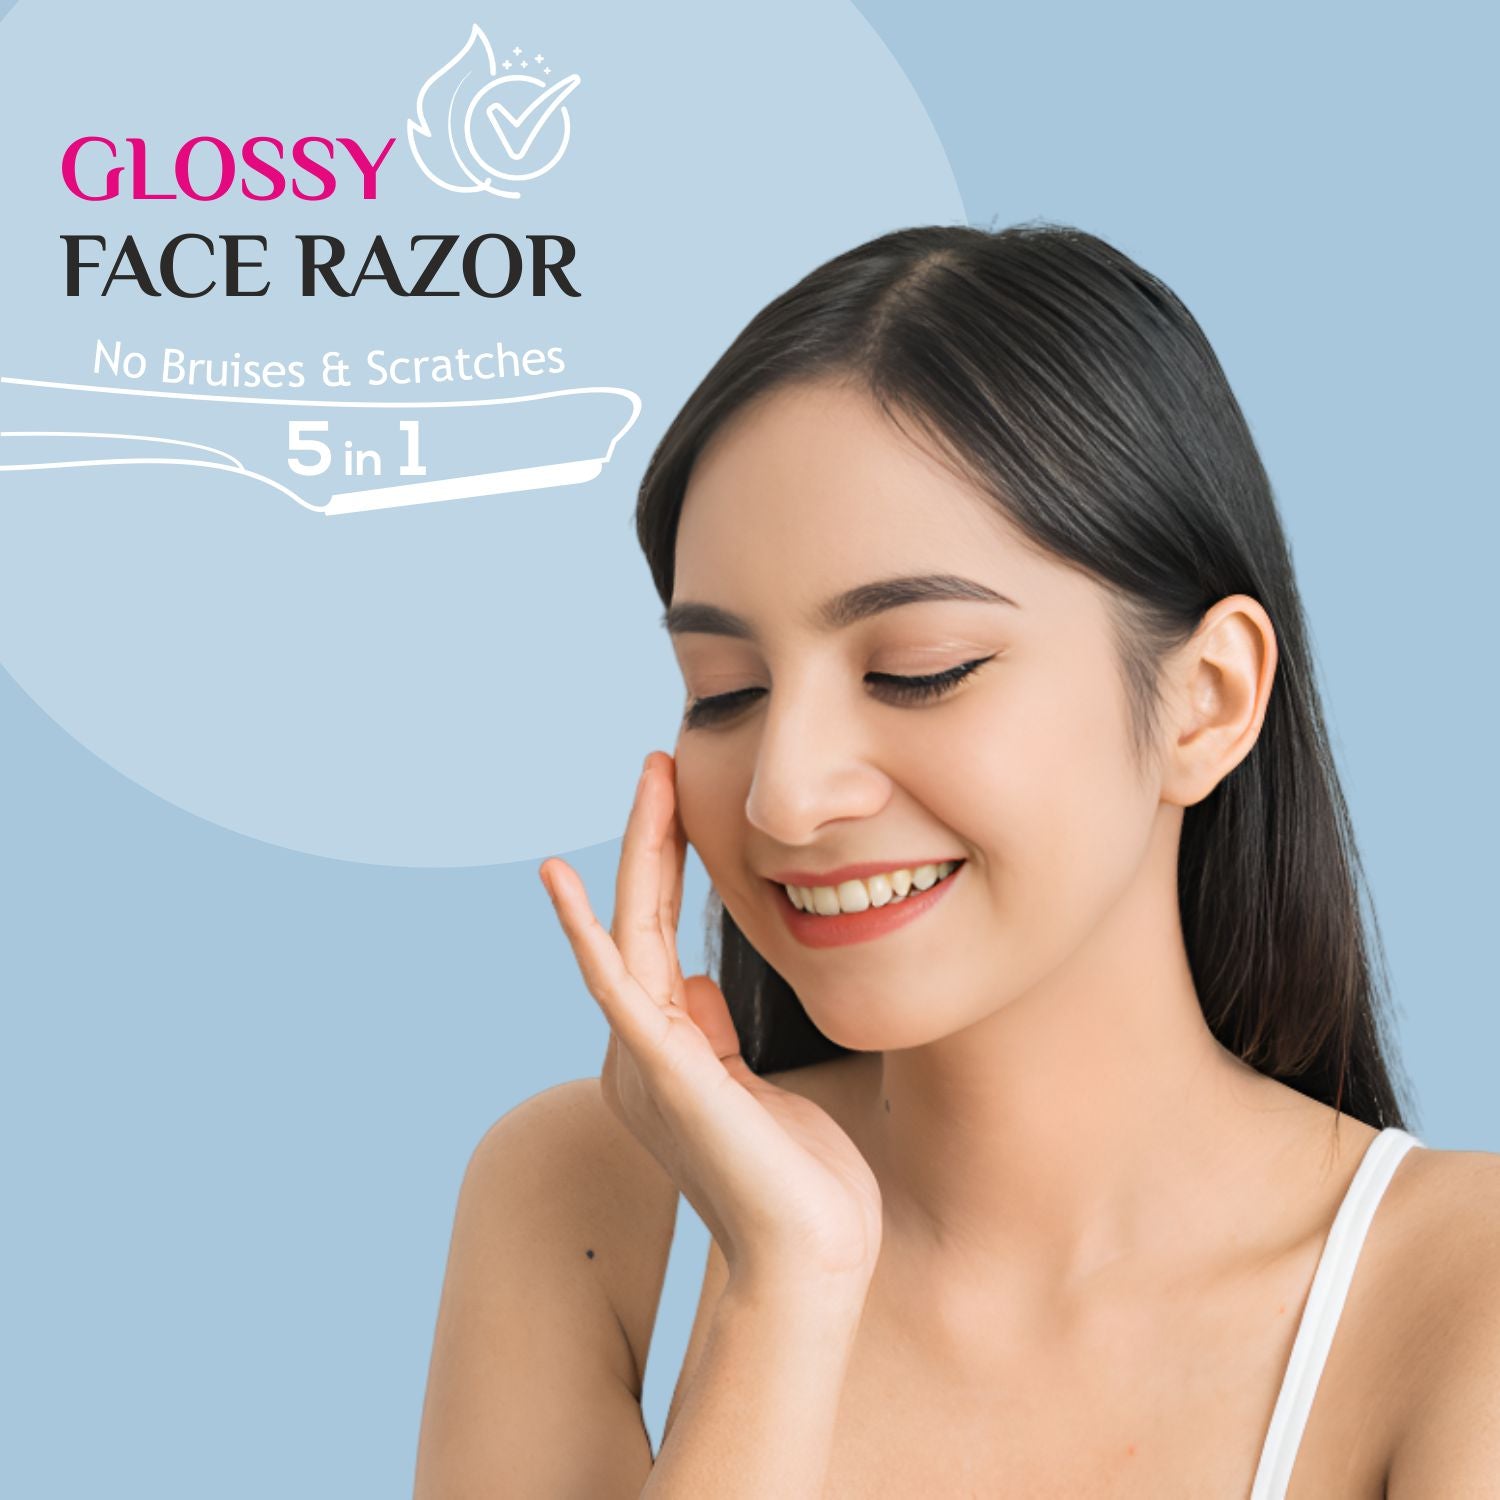 Gynocup Glossy Face Razor for Women